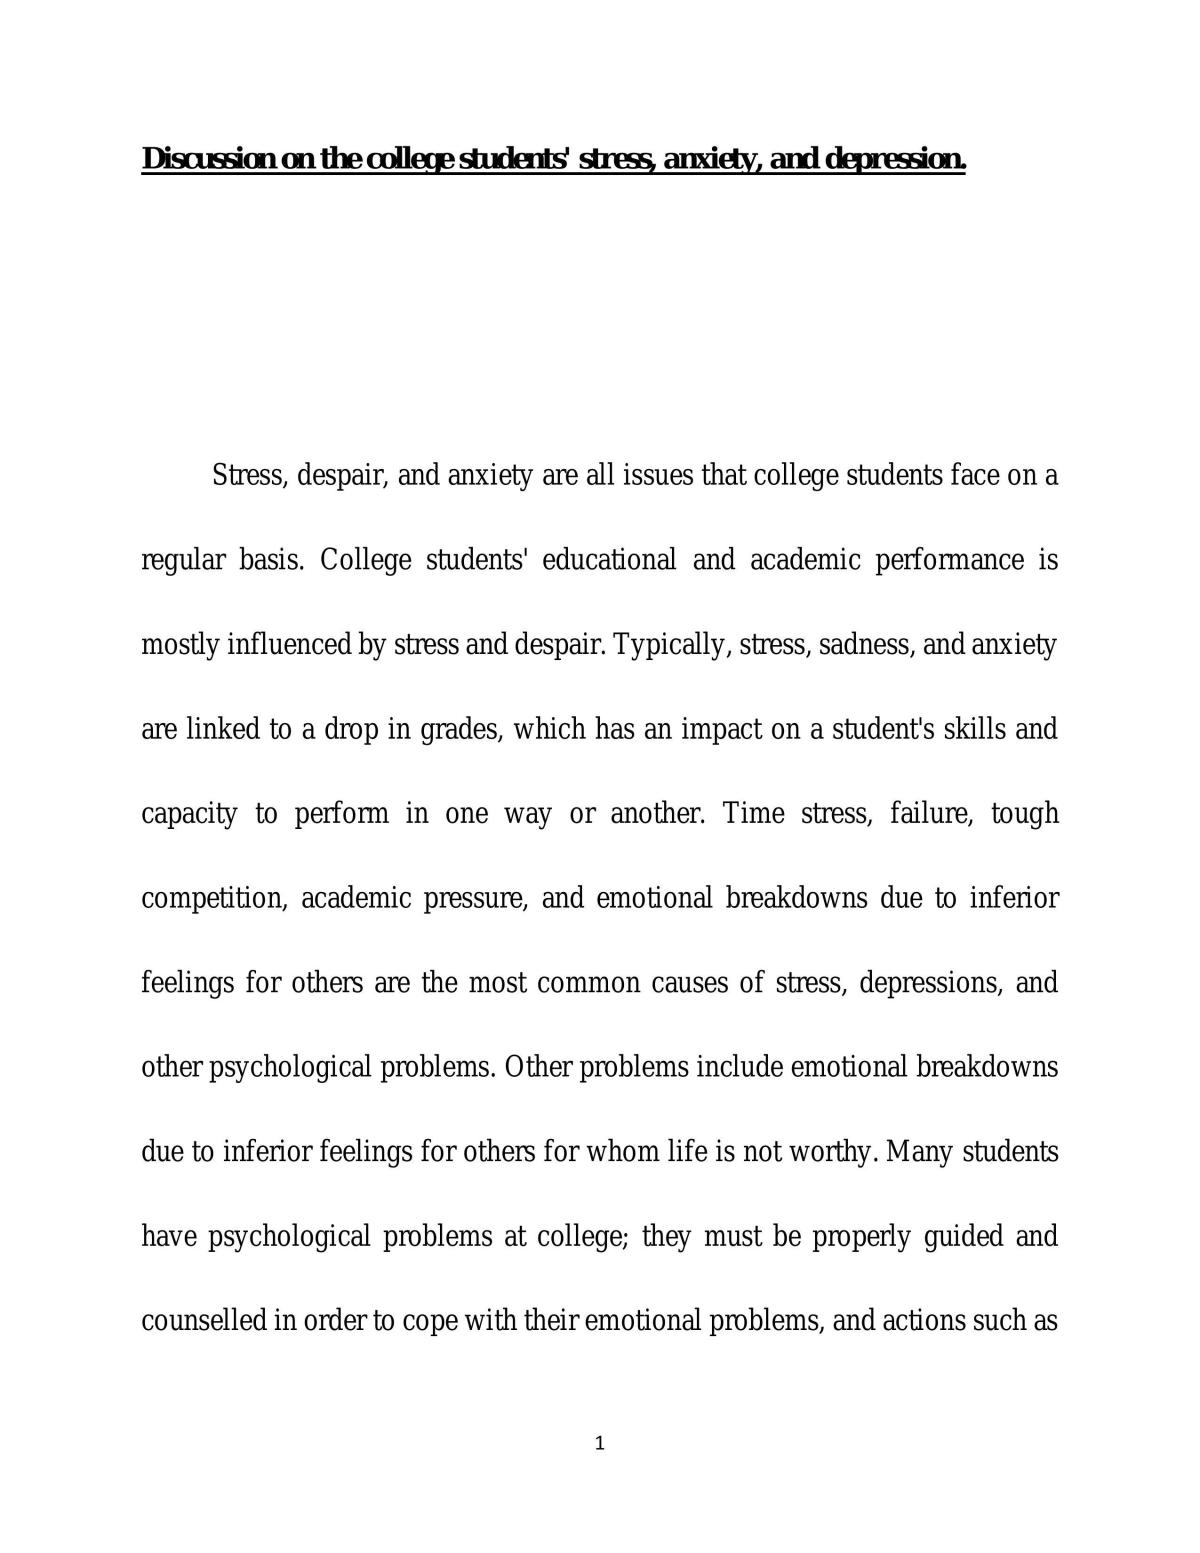 Stress, anxiety and depression on the college students  - Page 1